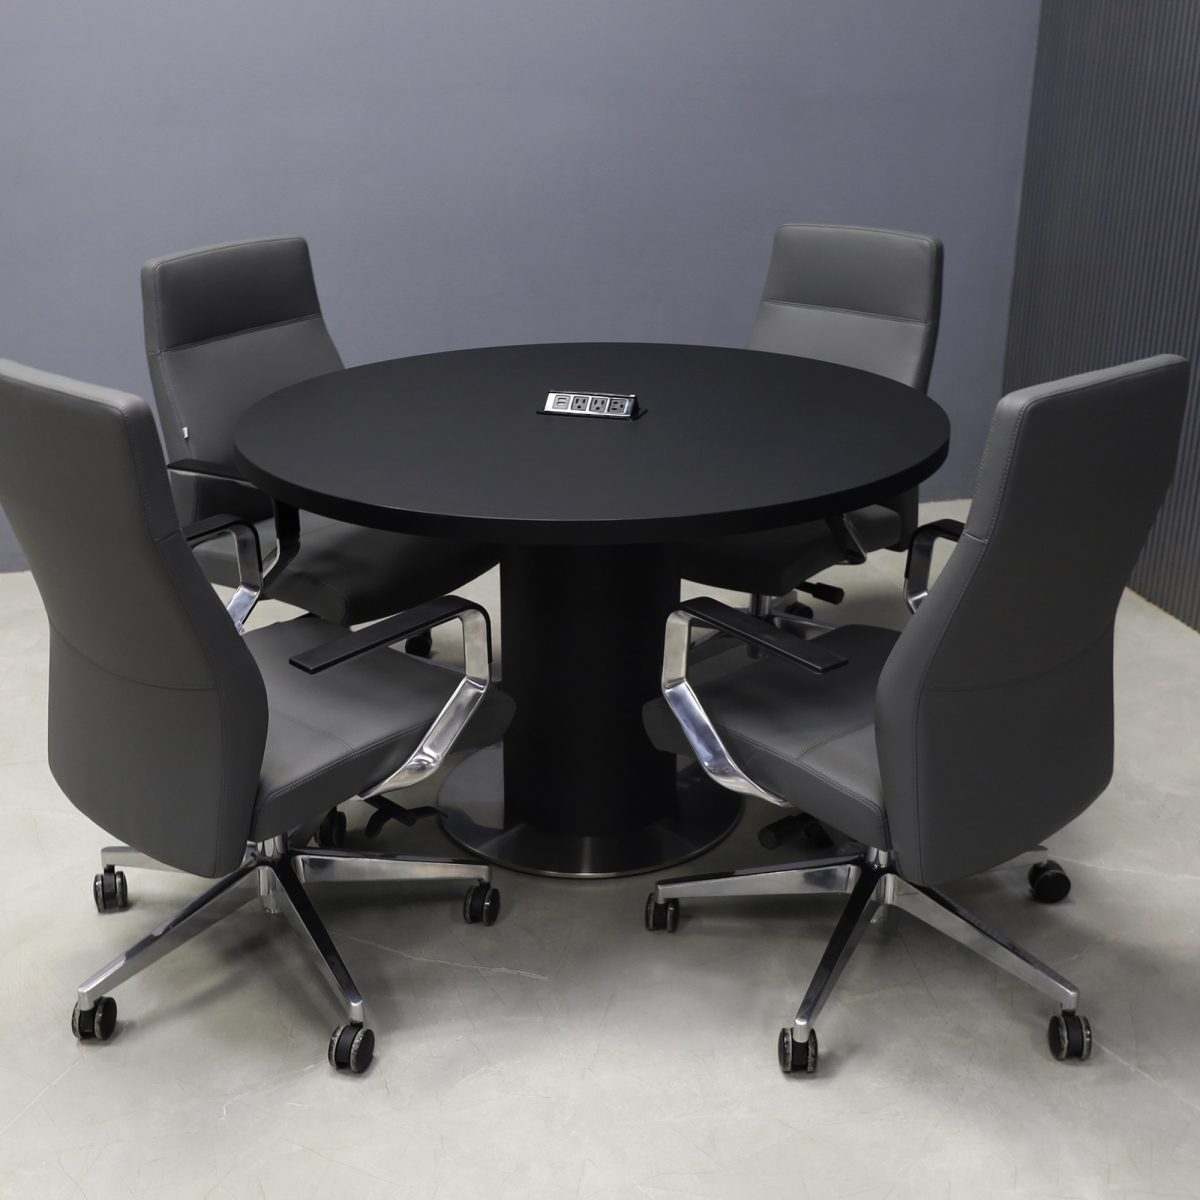 California Round Conference Table in Black Traceless Laminate - 48 In. - Stock #82